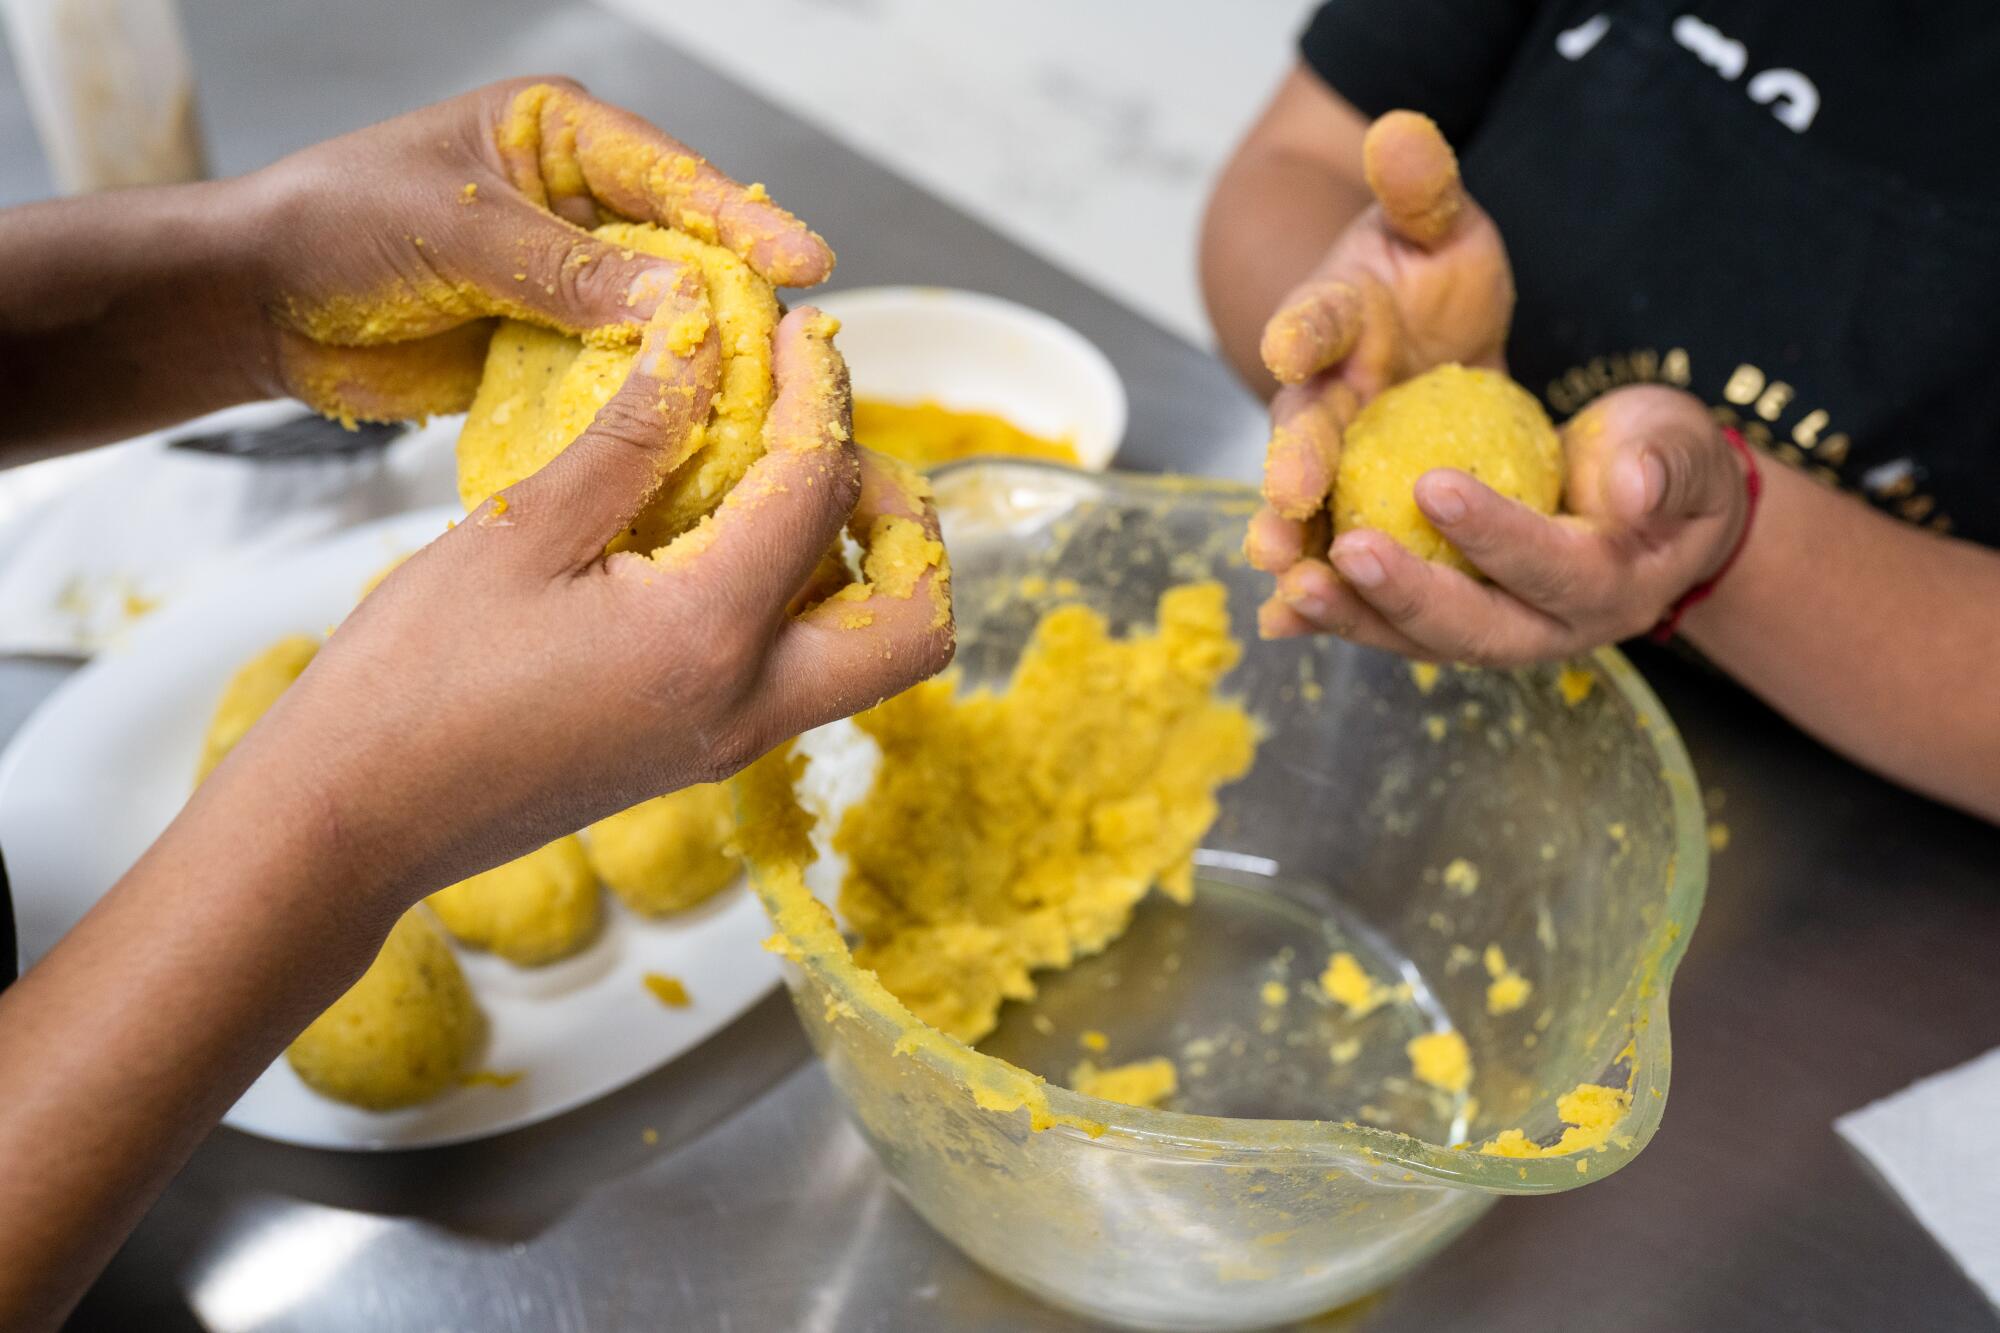 Two pairs of hands flattening and rolling a yellow mush into shapes.